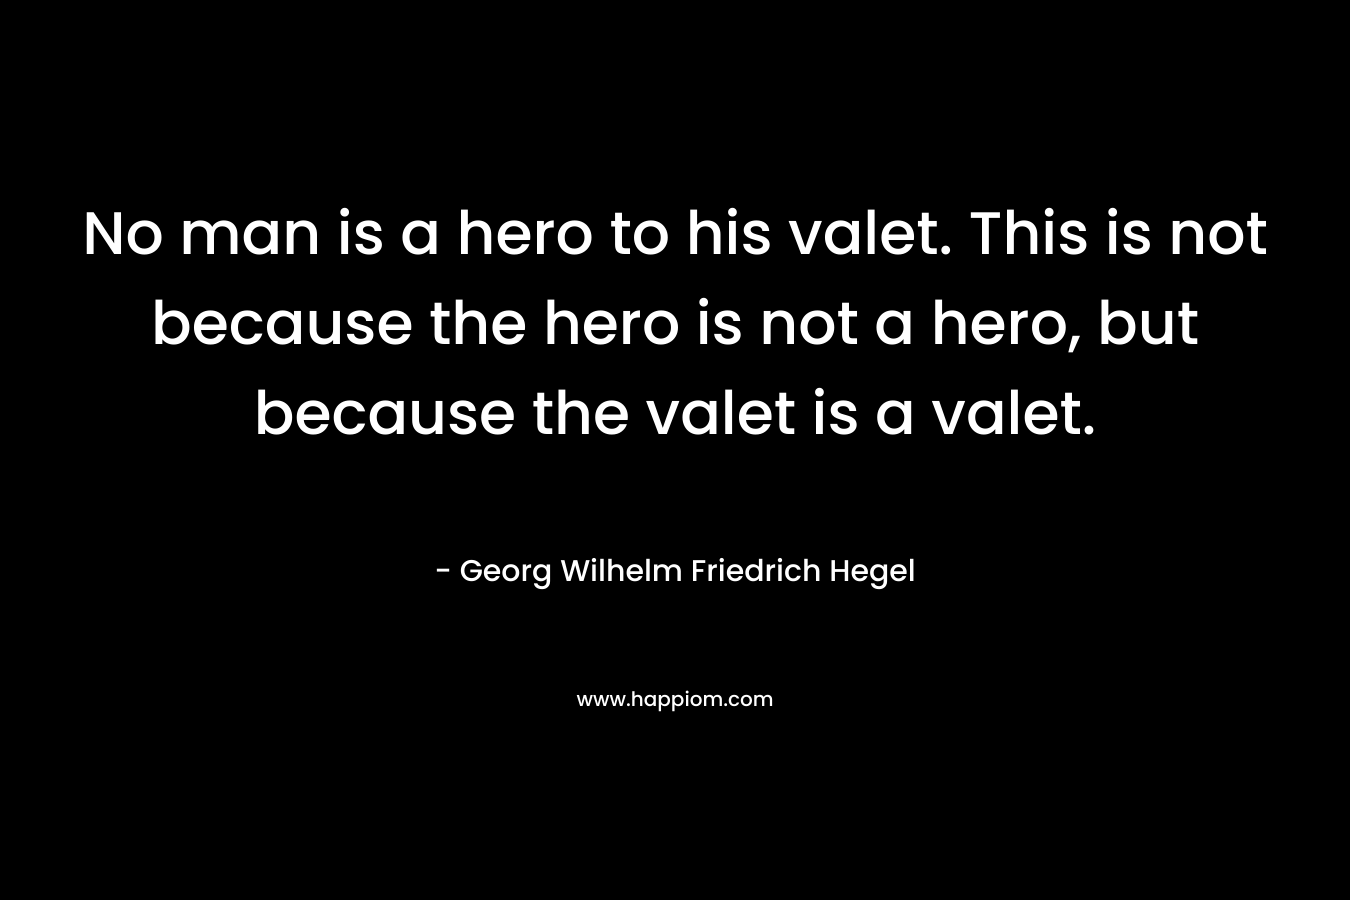 No man is a hero to his valet. This is not because the hero is not a hero, but because the valet is a valet.